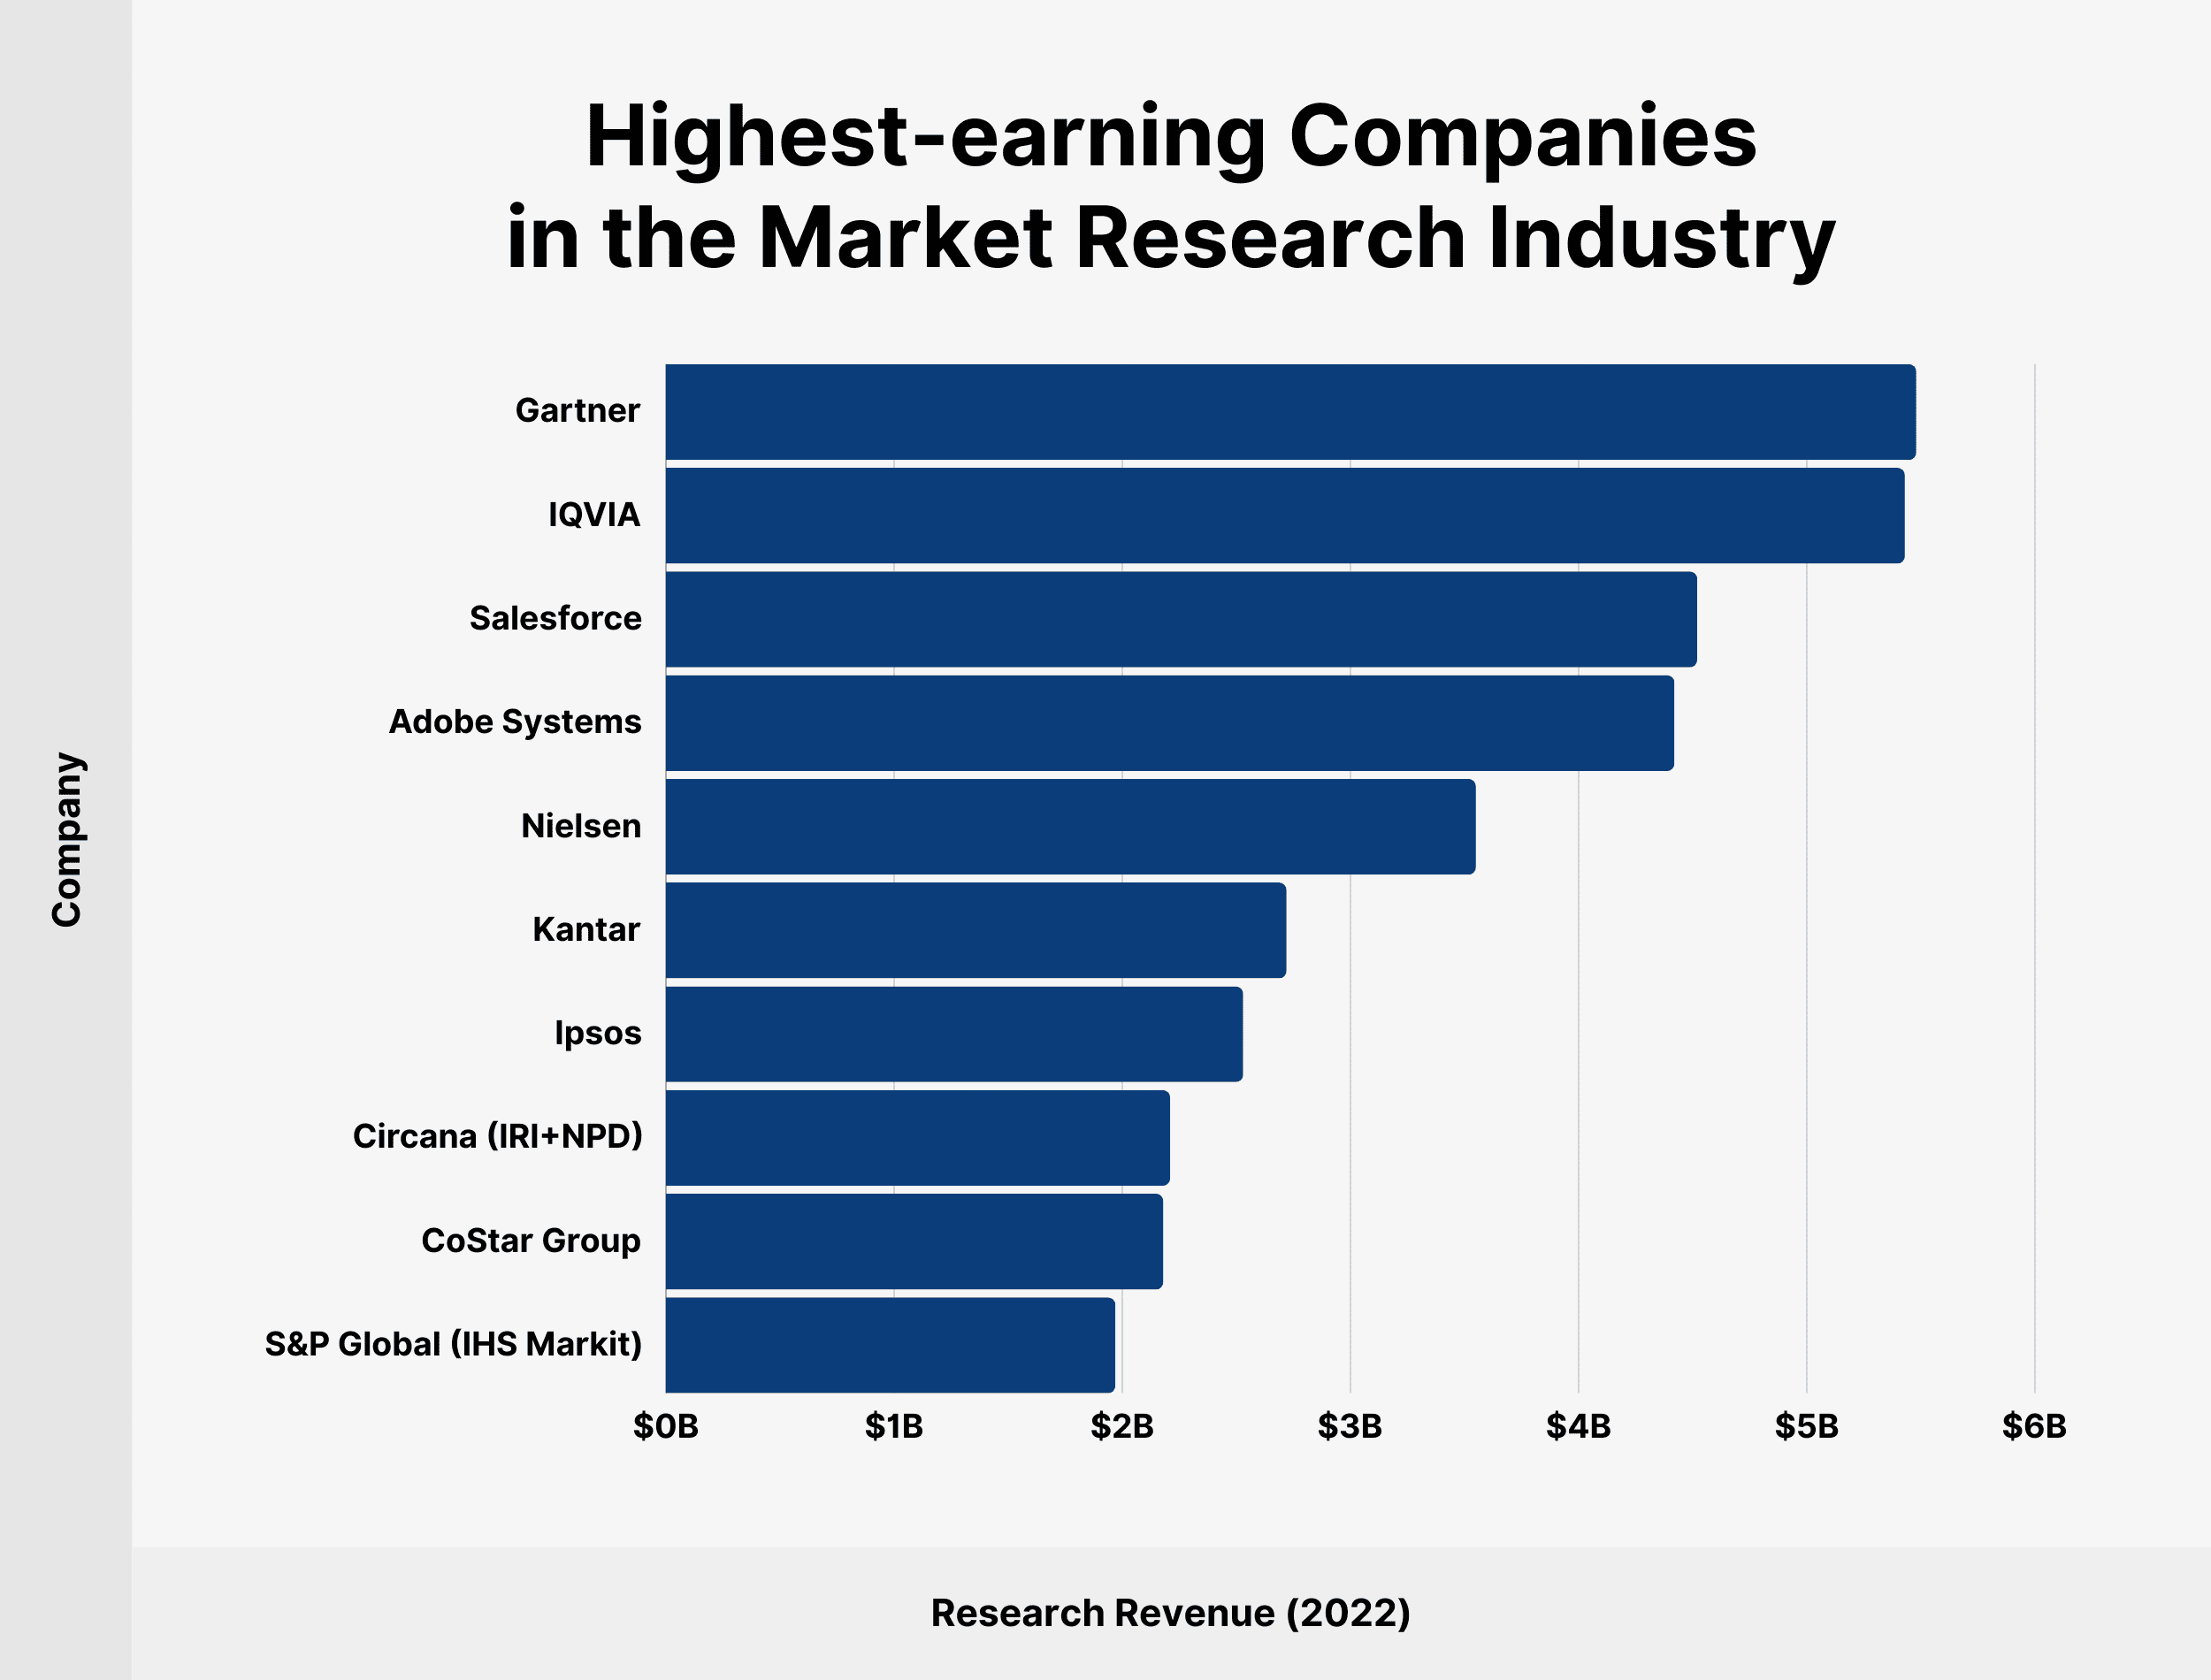 Highest-Earning Companies in the Market Research Industry